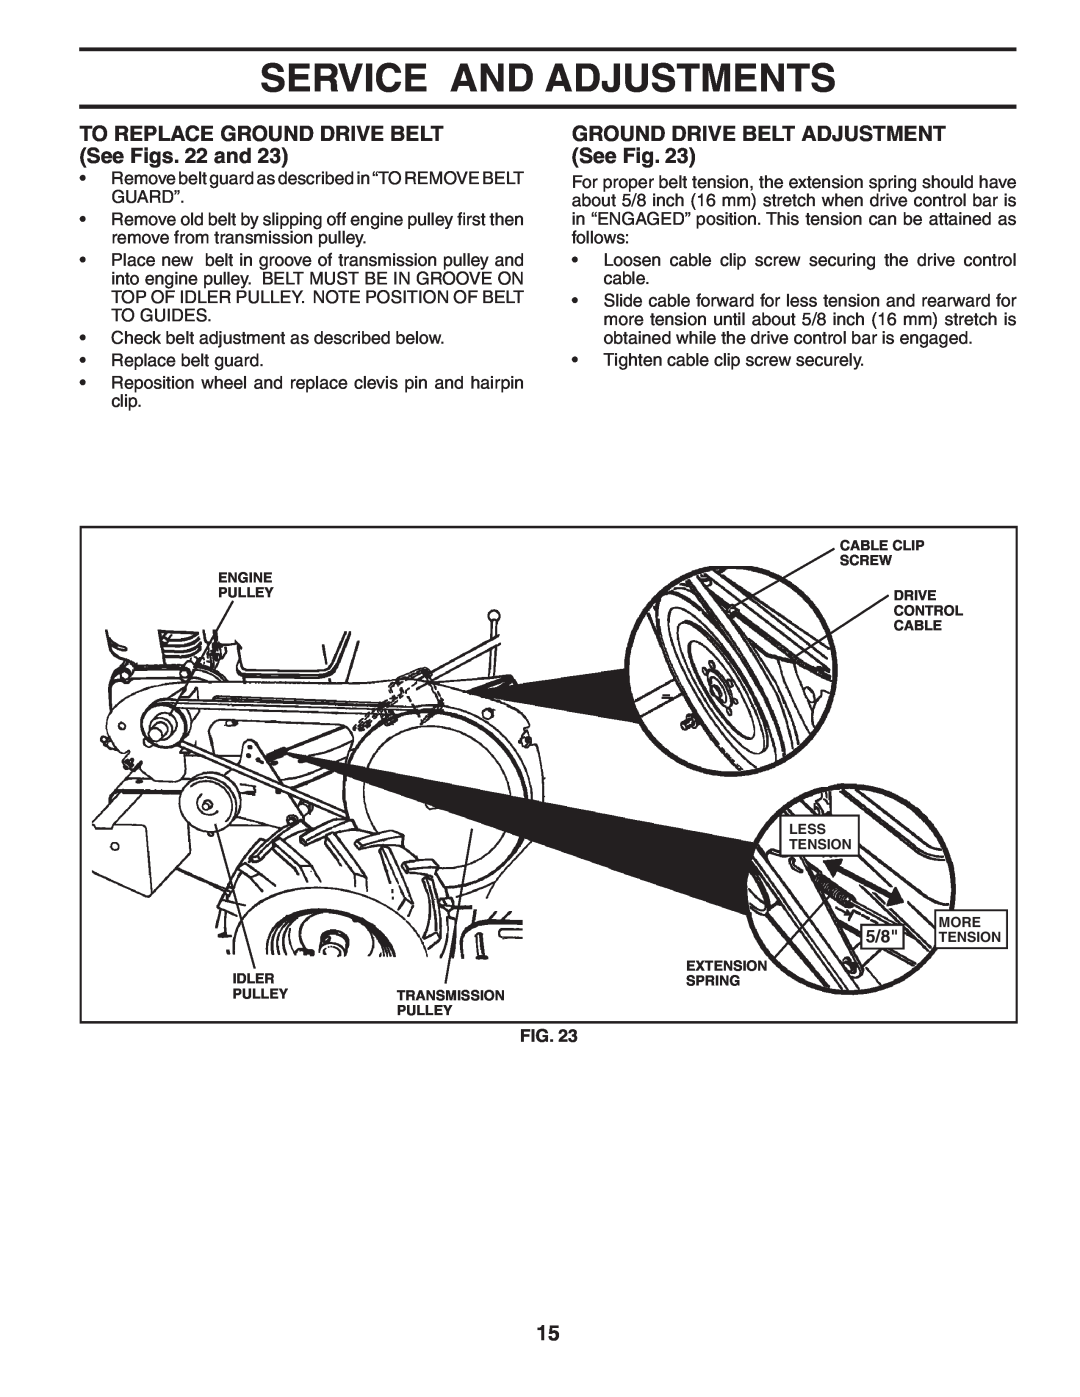 Poulan 401434 TO REPLACE GROUND DRIVE BELT See Figs. 22 and, GROUND DRIVE BELT ADJUSTMENT See Fig, Service And Adjustments 